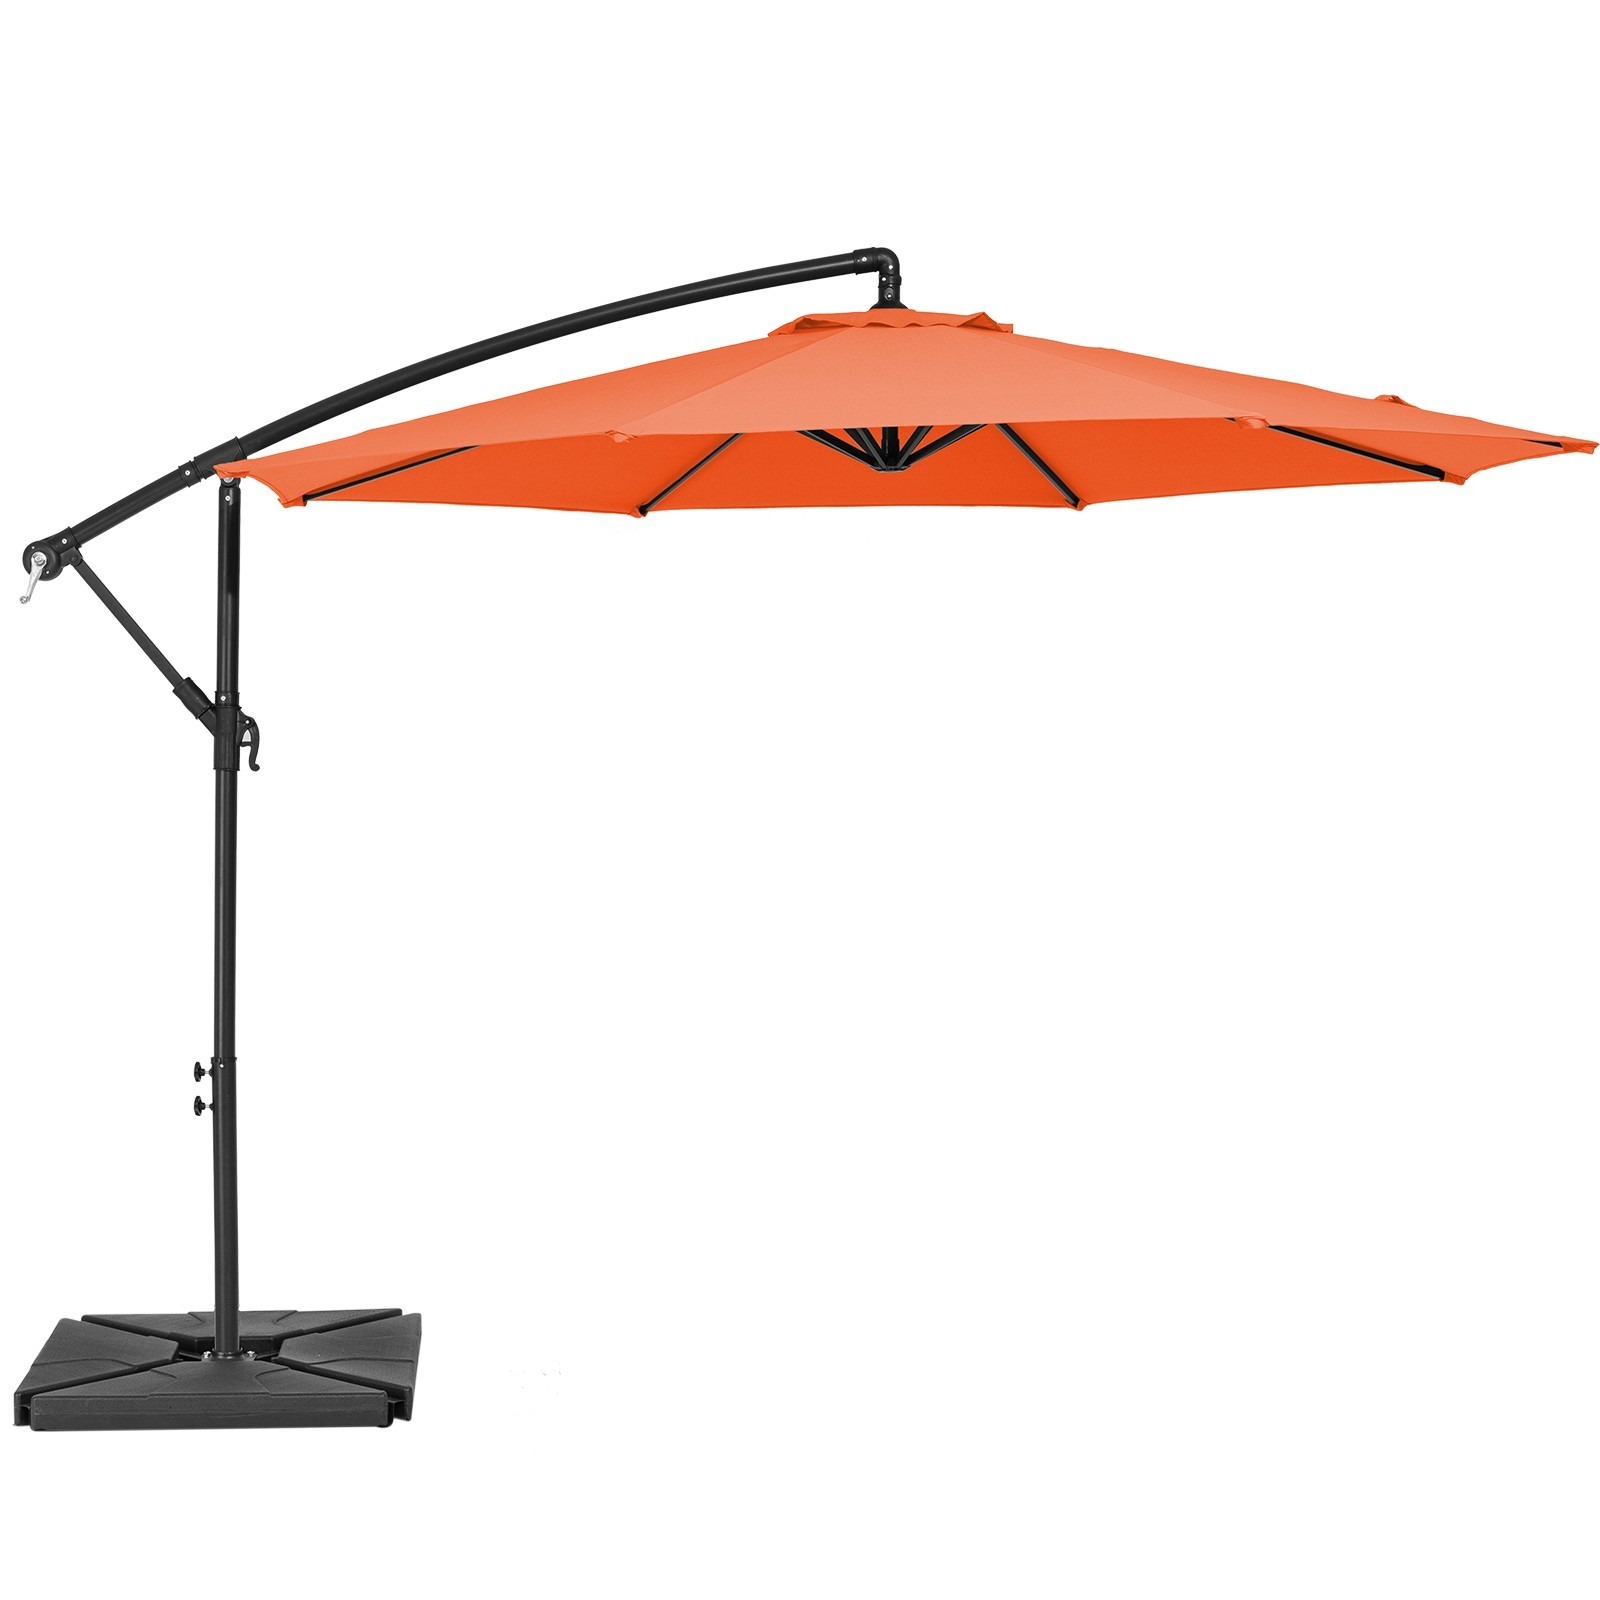 Serwall 10ft Heavy Duty Patio Hanging Offset Cantilever Patio Umbrella W/ Base Included, Orange - image 4 of 6